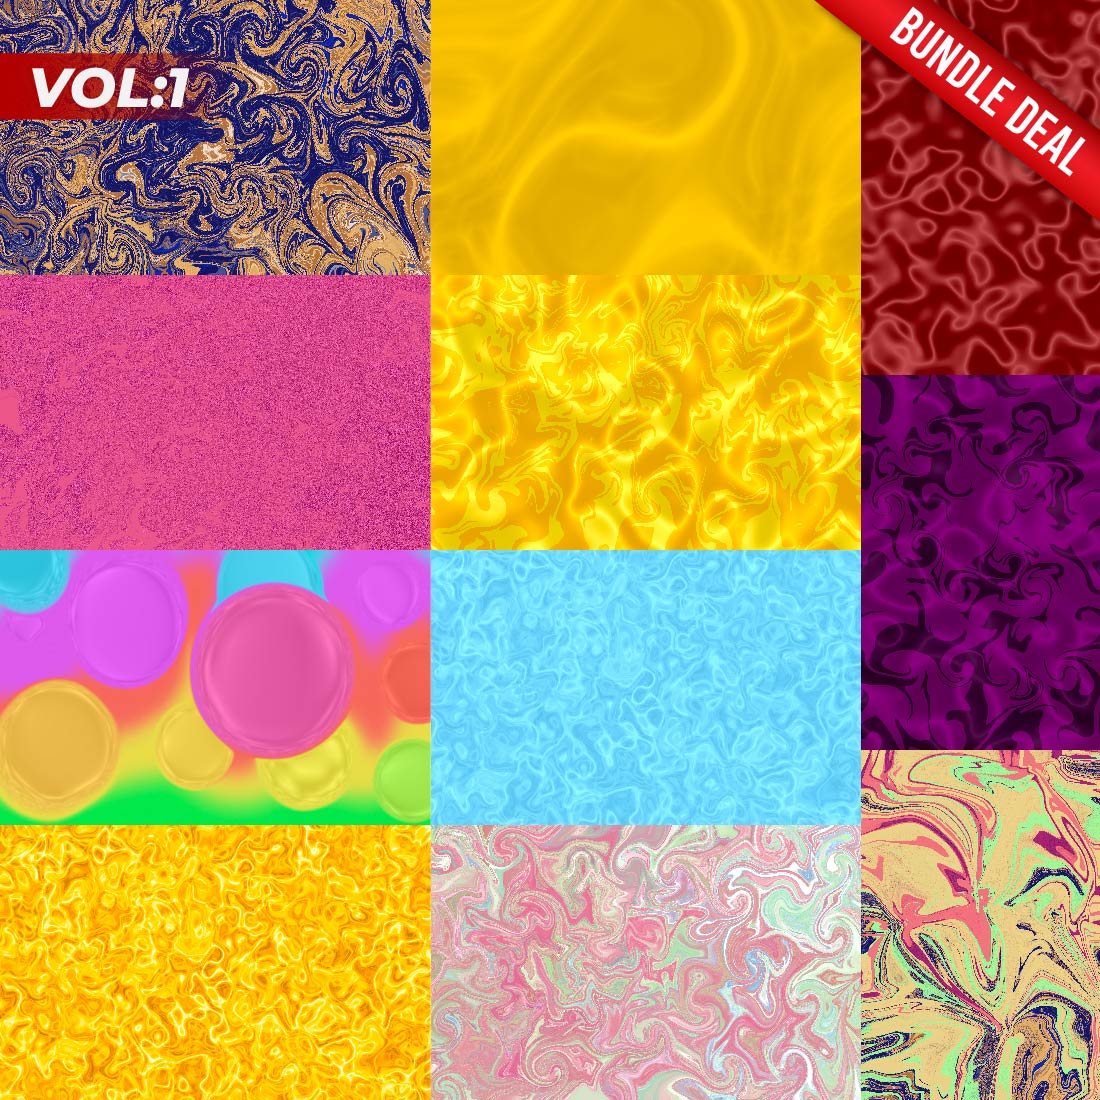 15+ Beautiful Modern Liquified Background Designs - Only for $10 preview image.